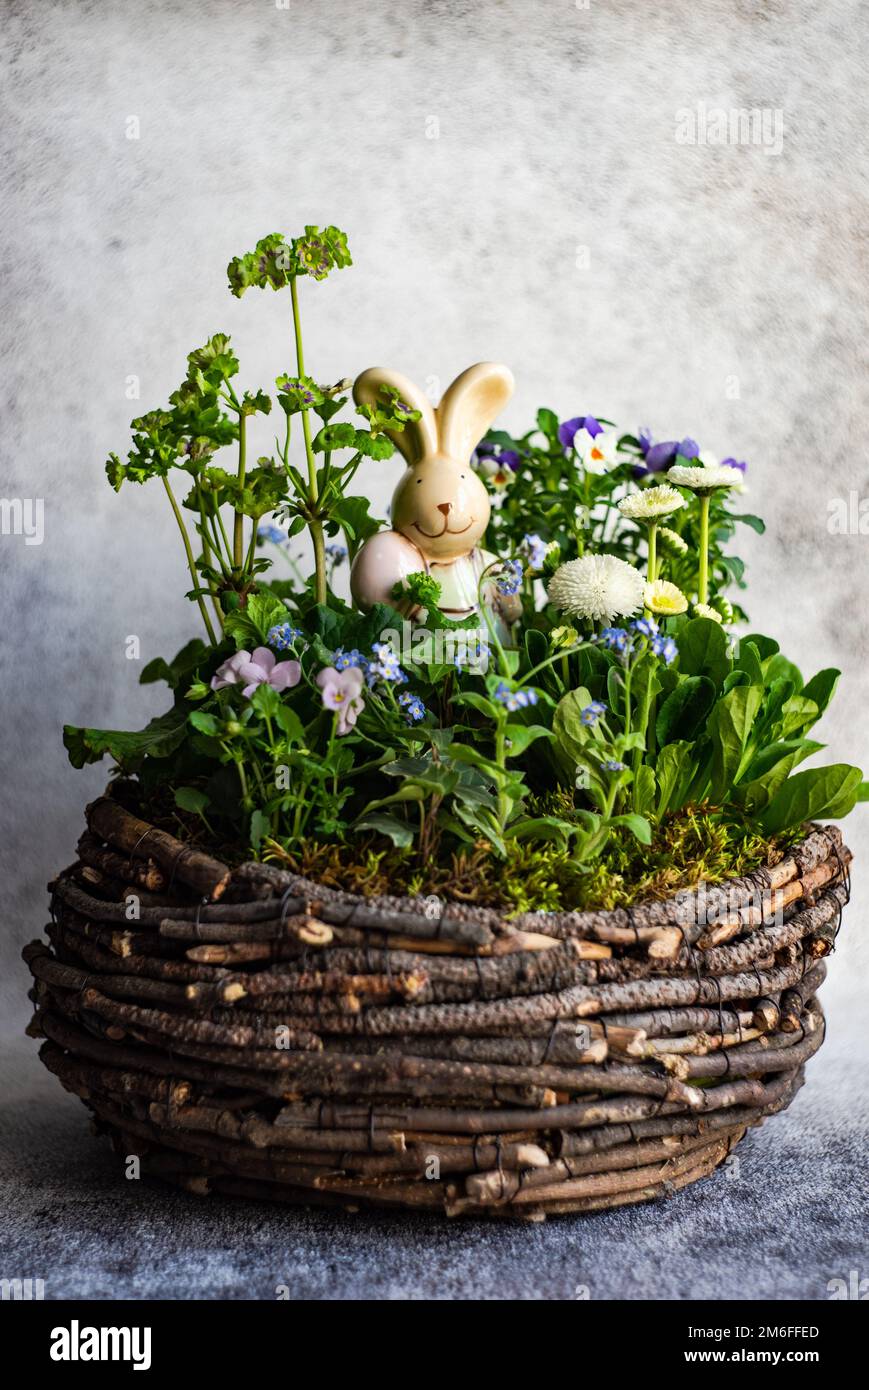 Easter floral composition Stock Photo